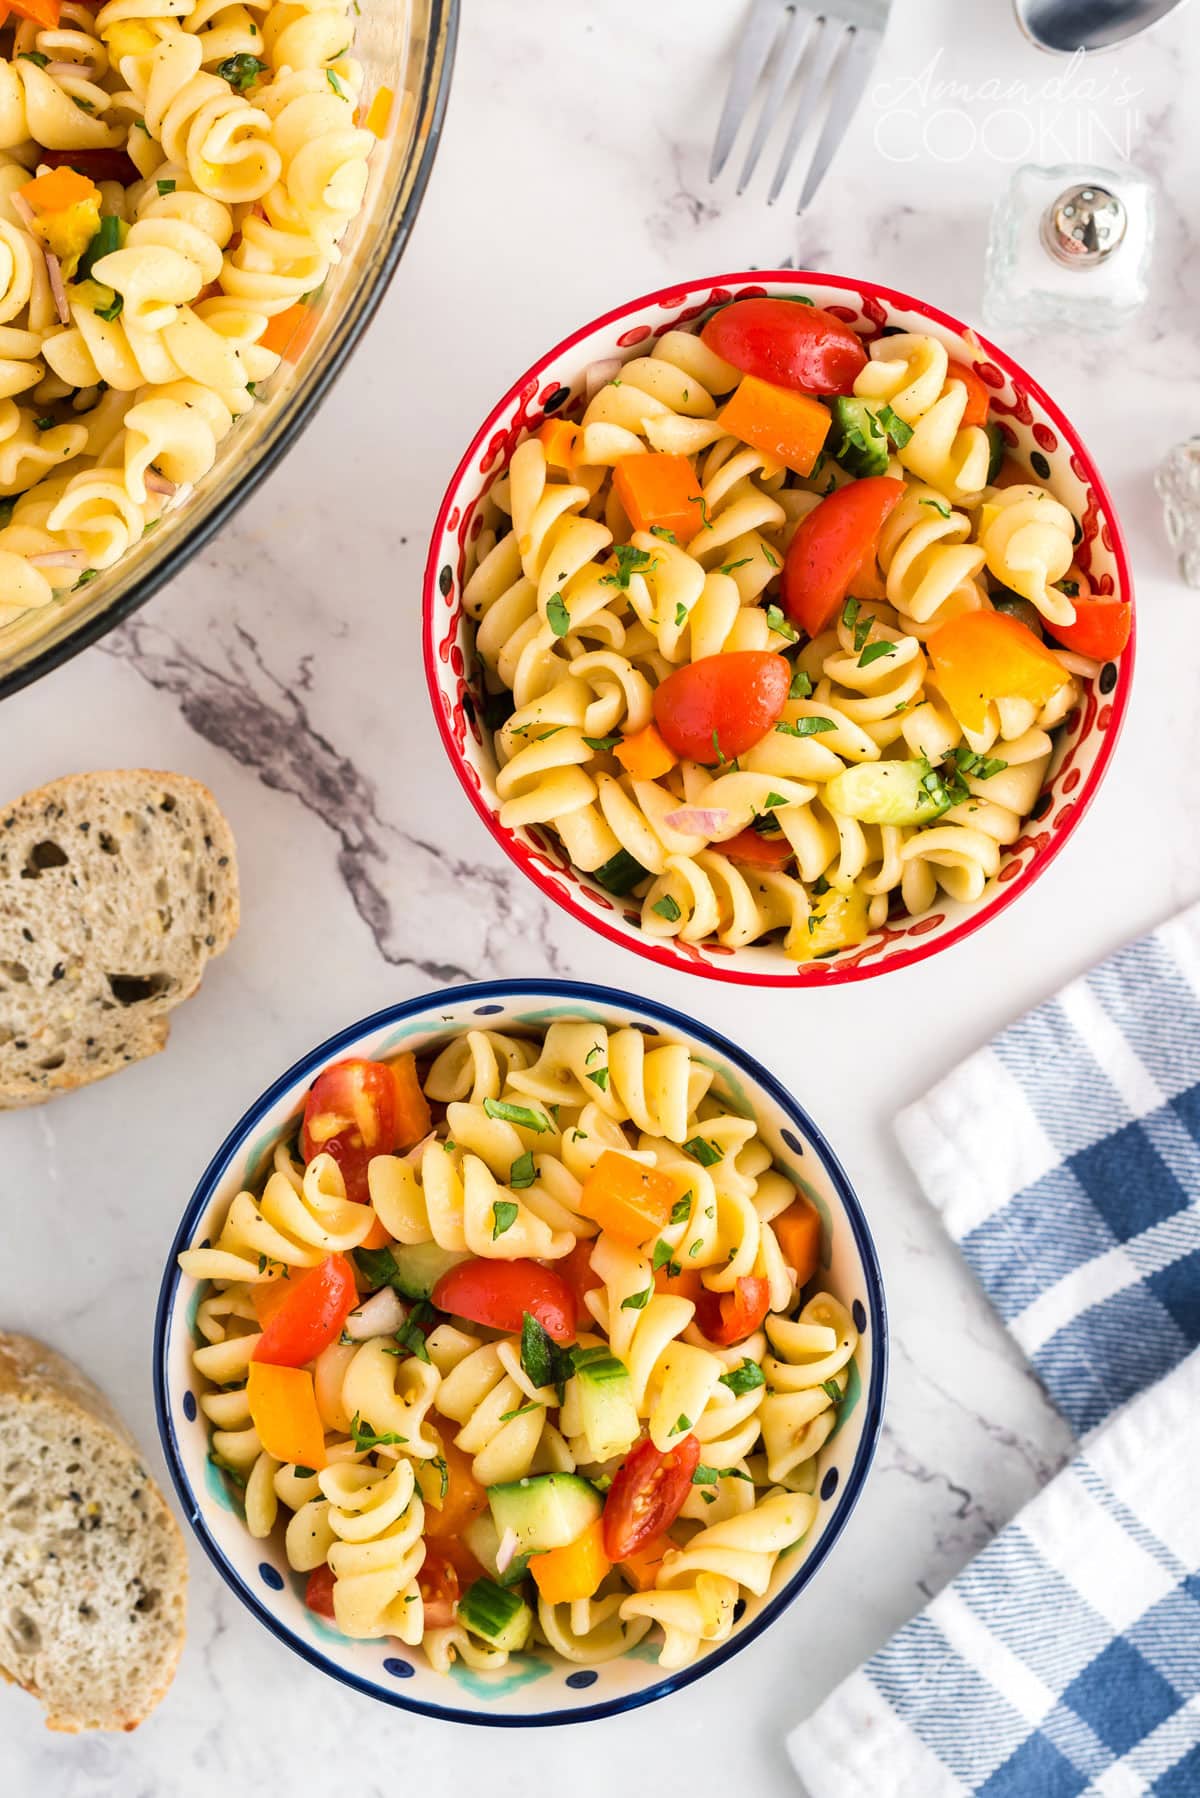 two bowls of pasta salad with a blue and white tea towel